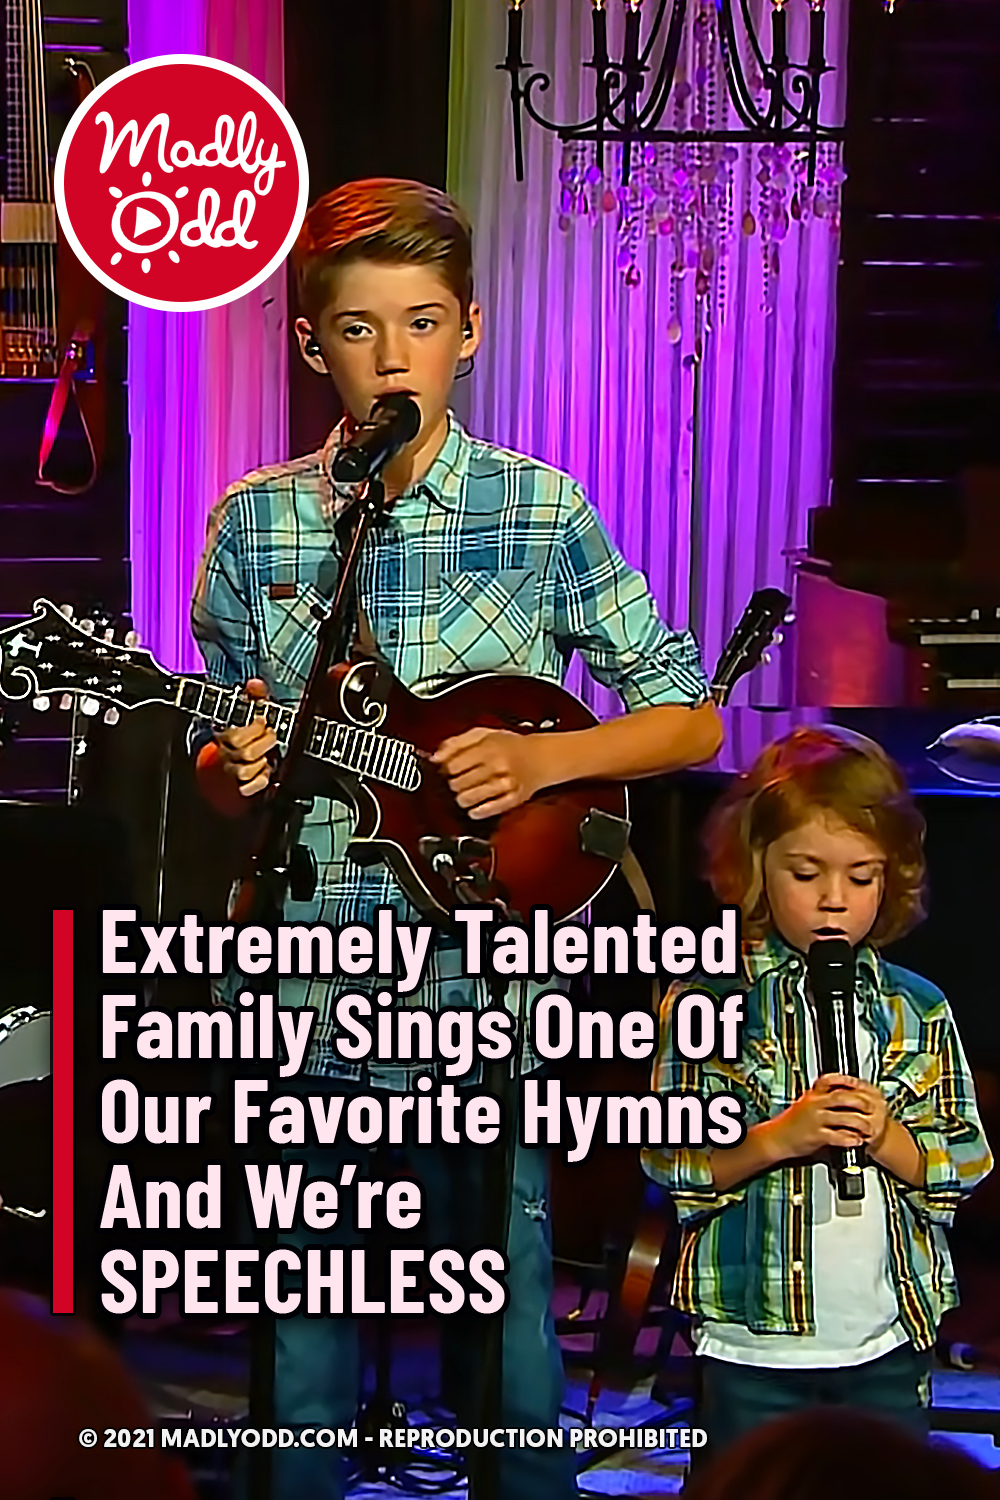 Extremely Talented Family Sings One Of Our Favorite Hymns And We’re SPEECHLESS